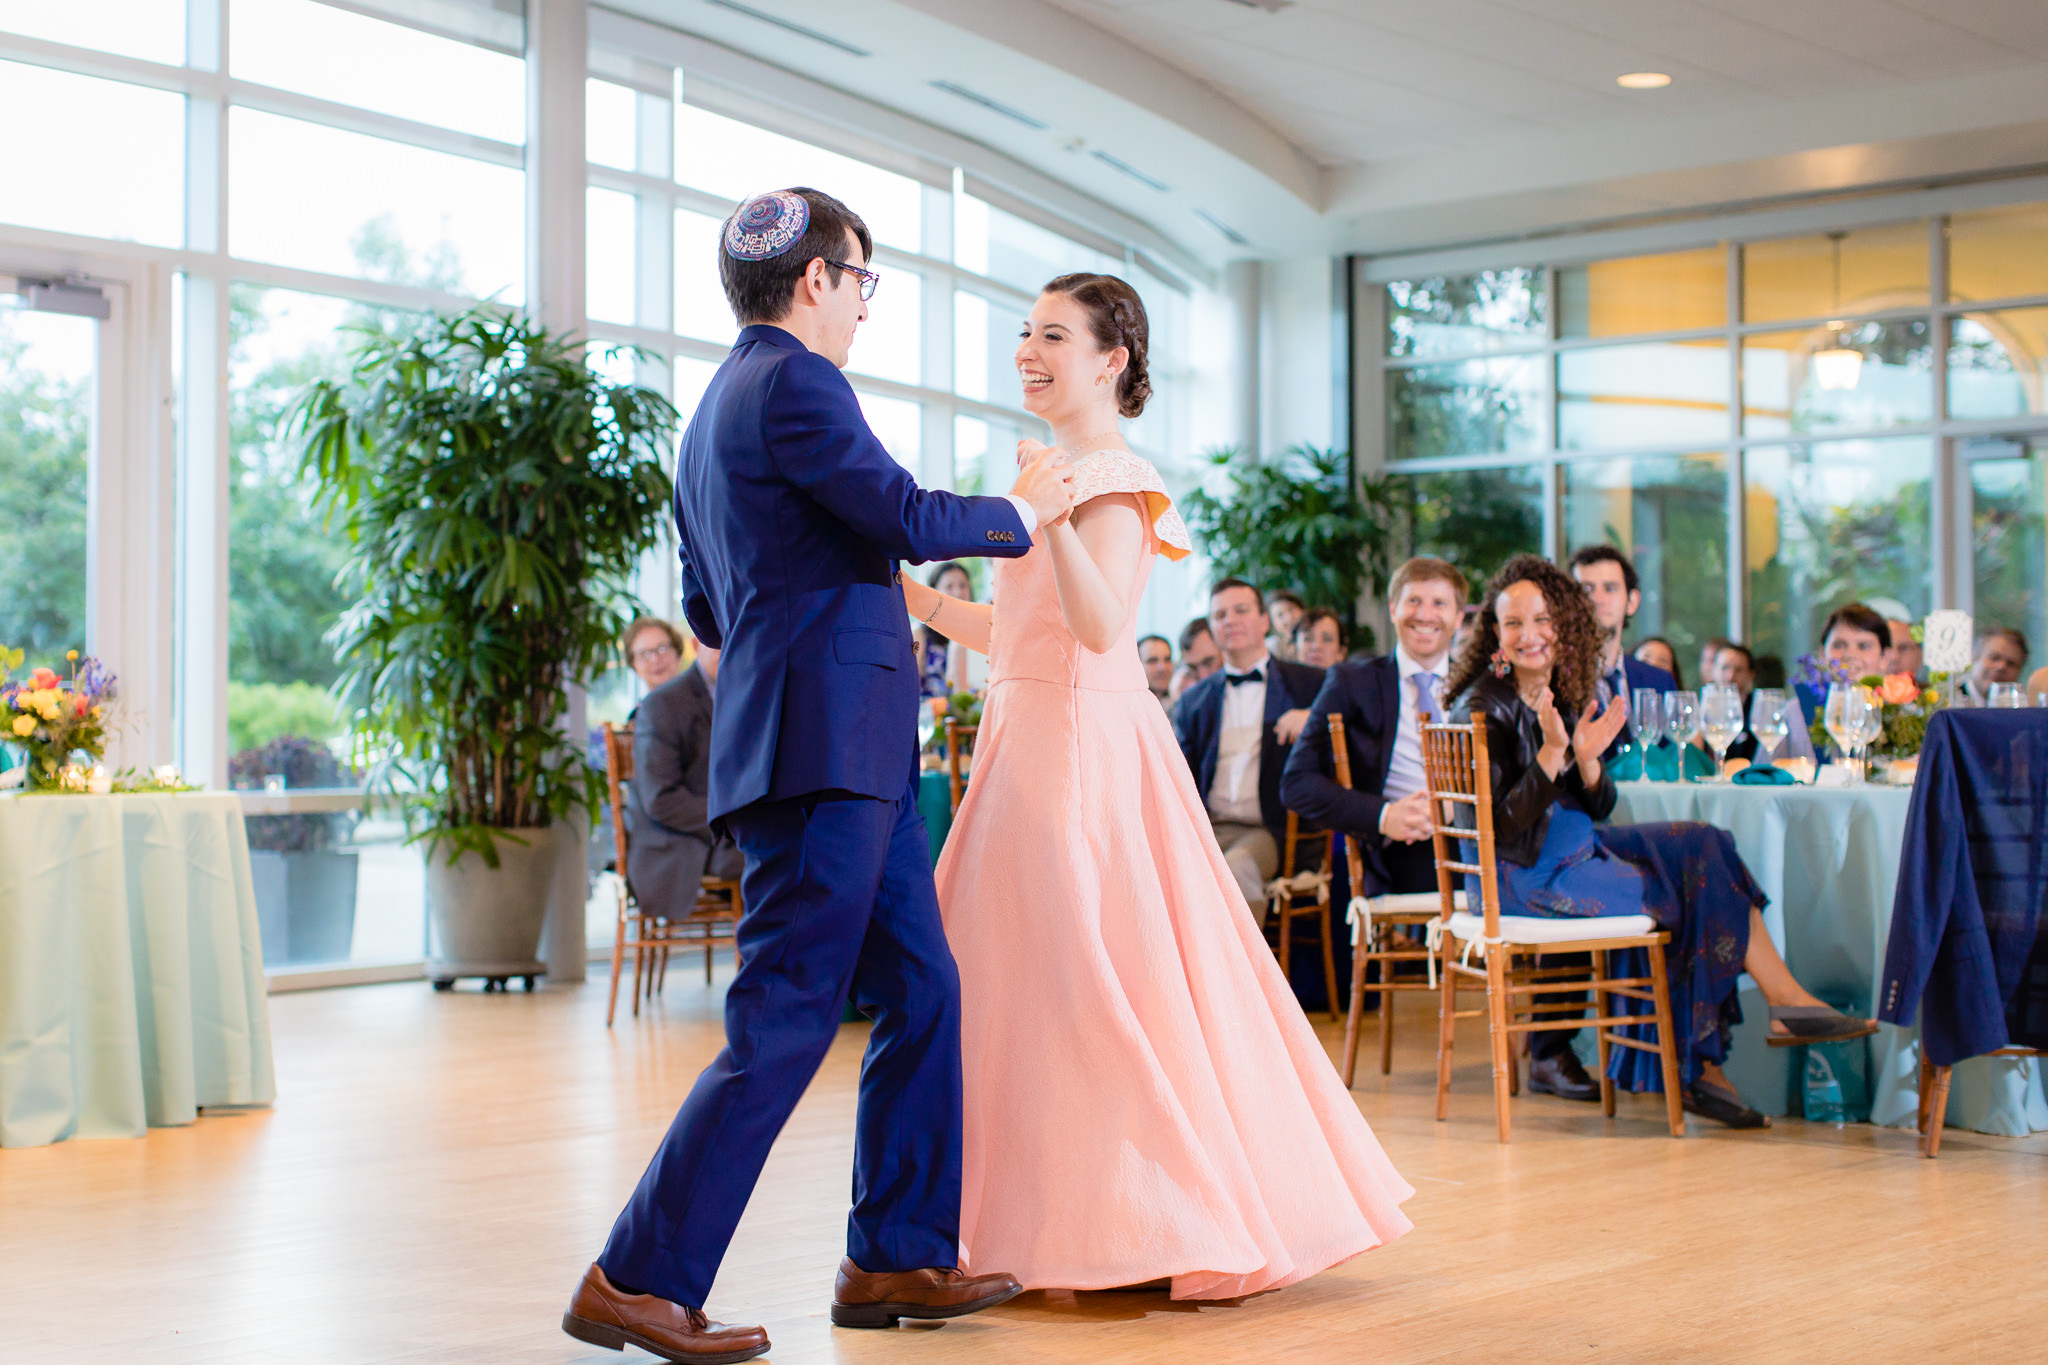 Bride & groom share a choreographed first dance at Phipps Conservatory